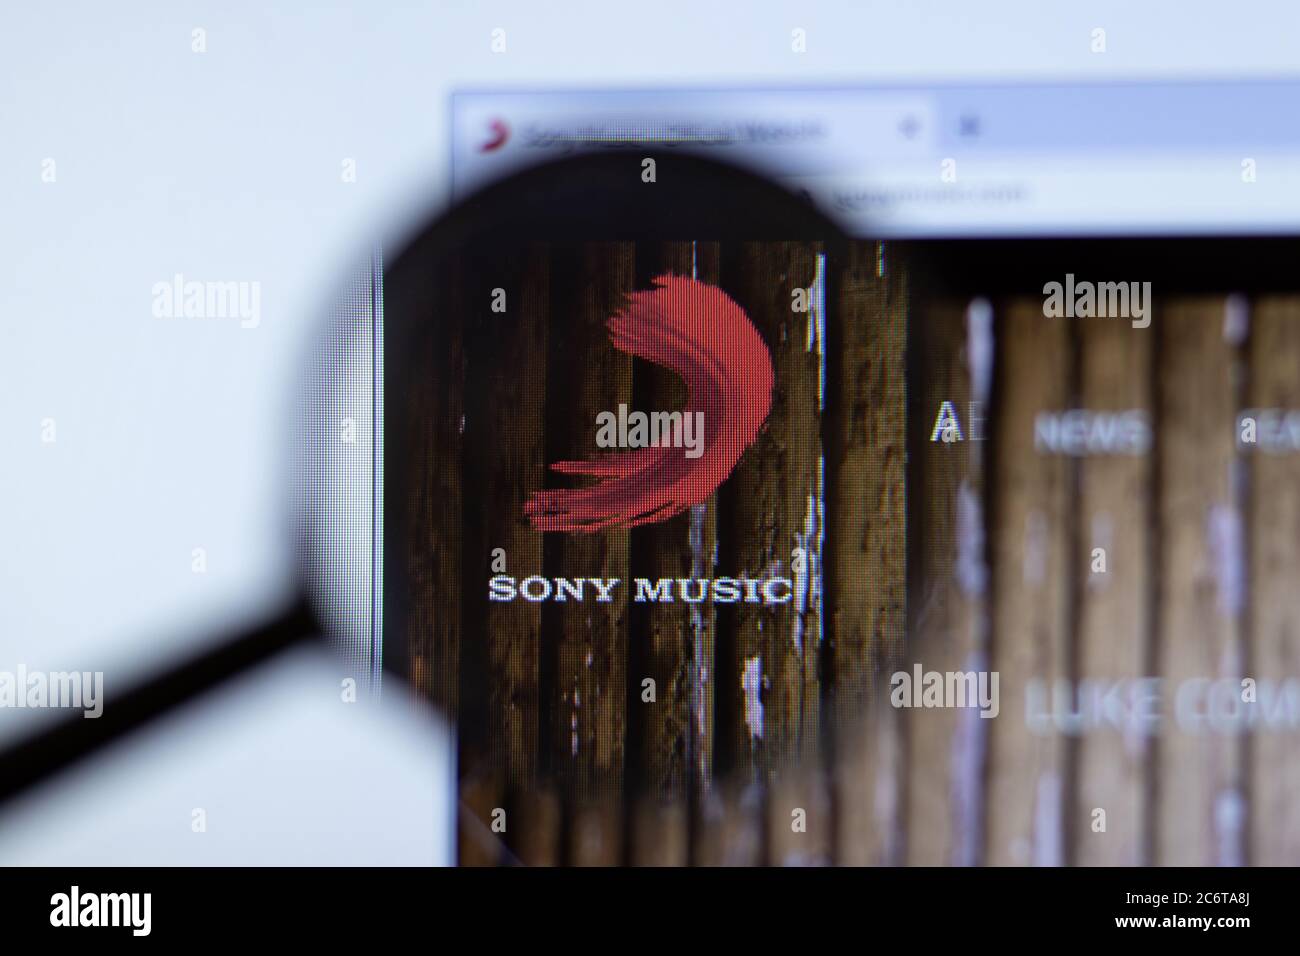 Moscow, Russia - 1 June 2020: Sony Music website with logo , Illustrative Editorial Stock Photo